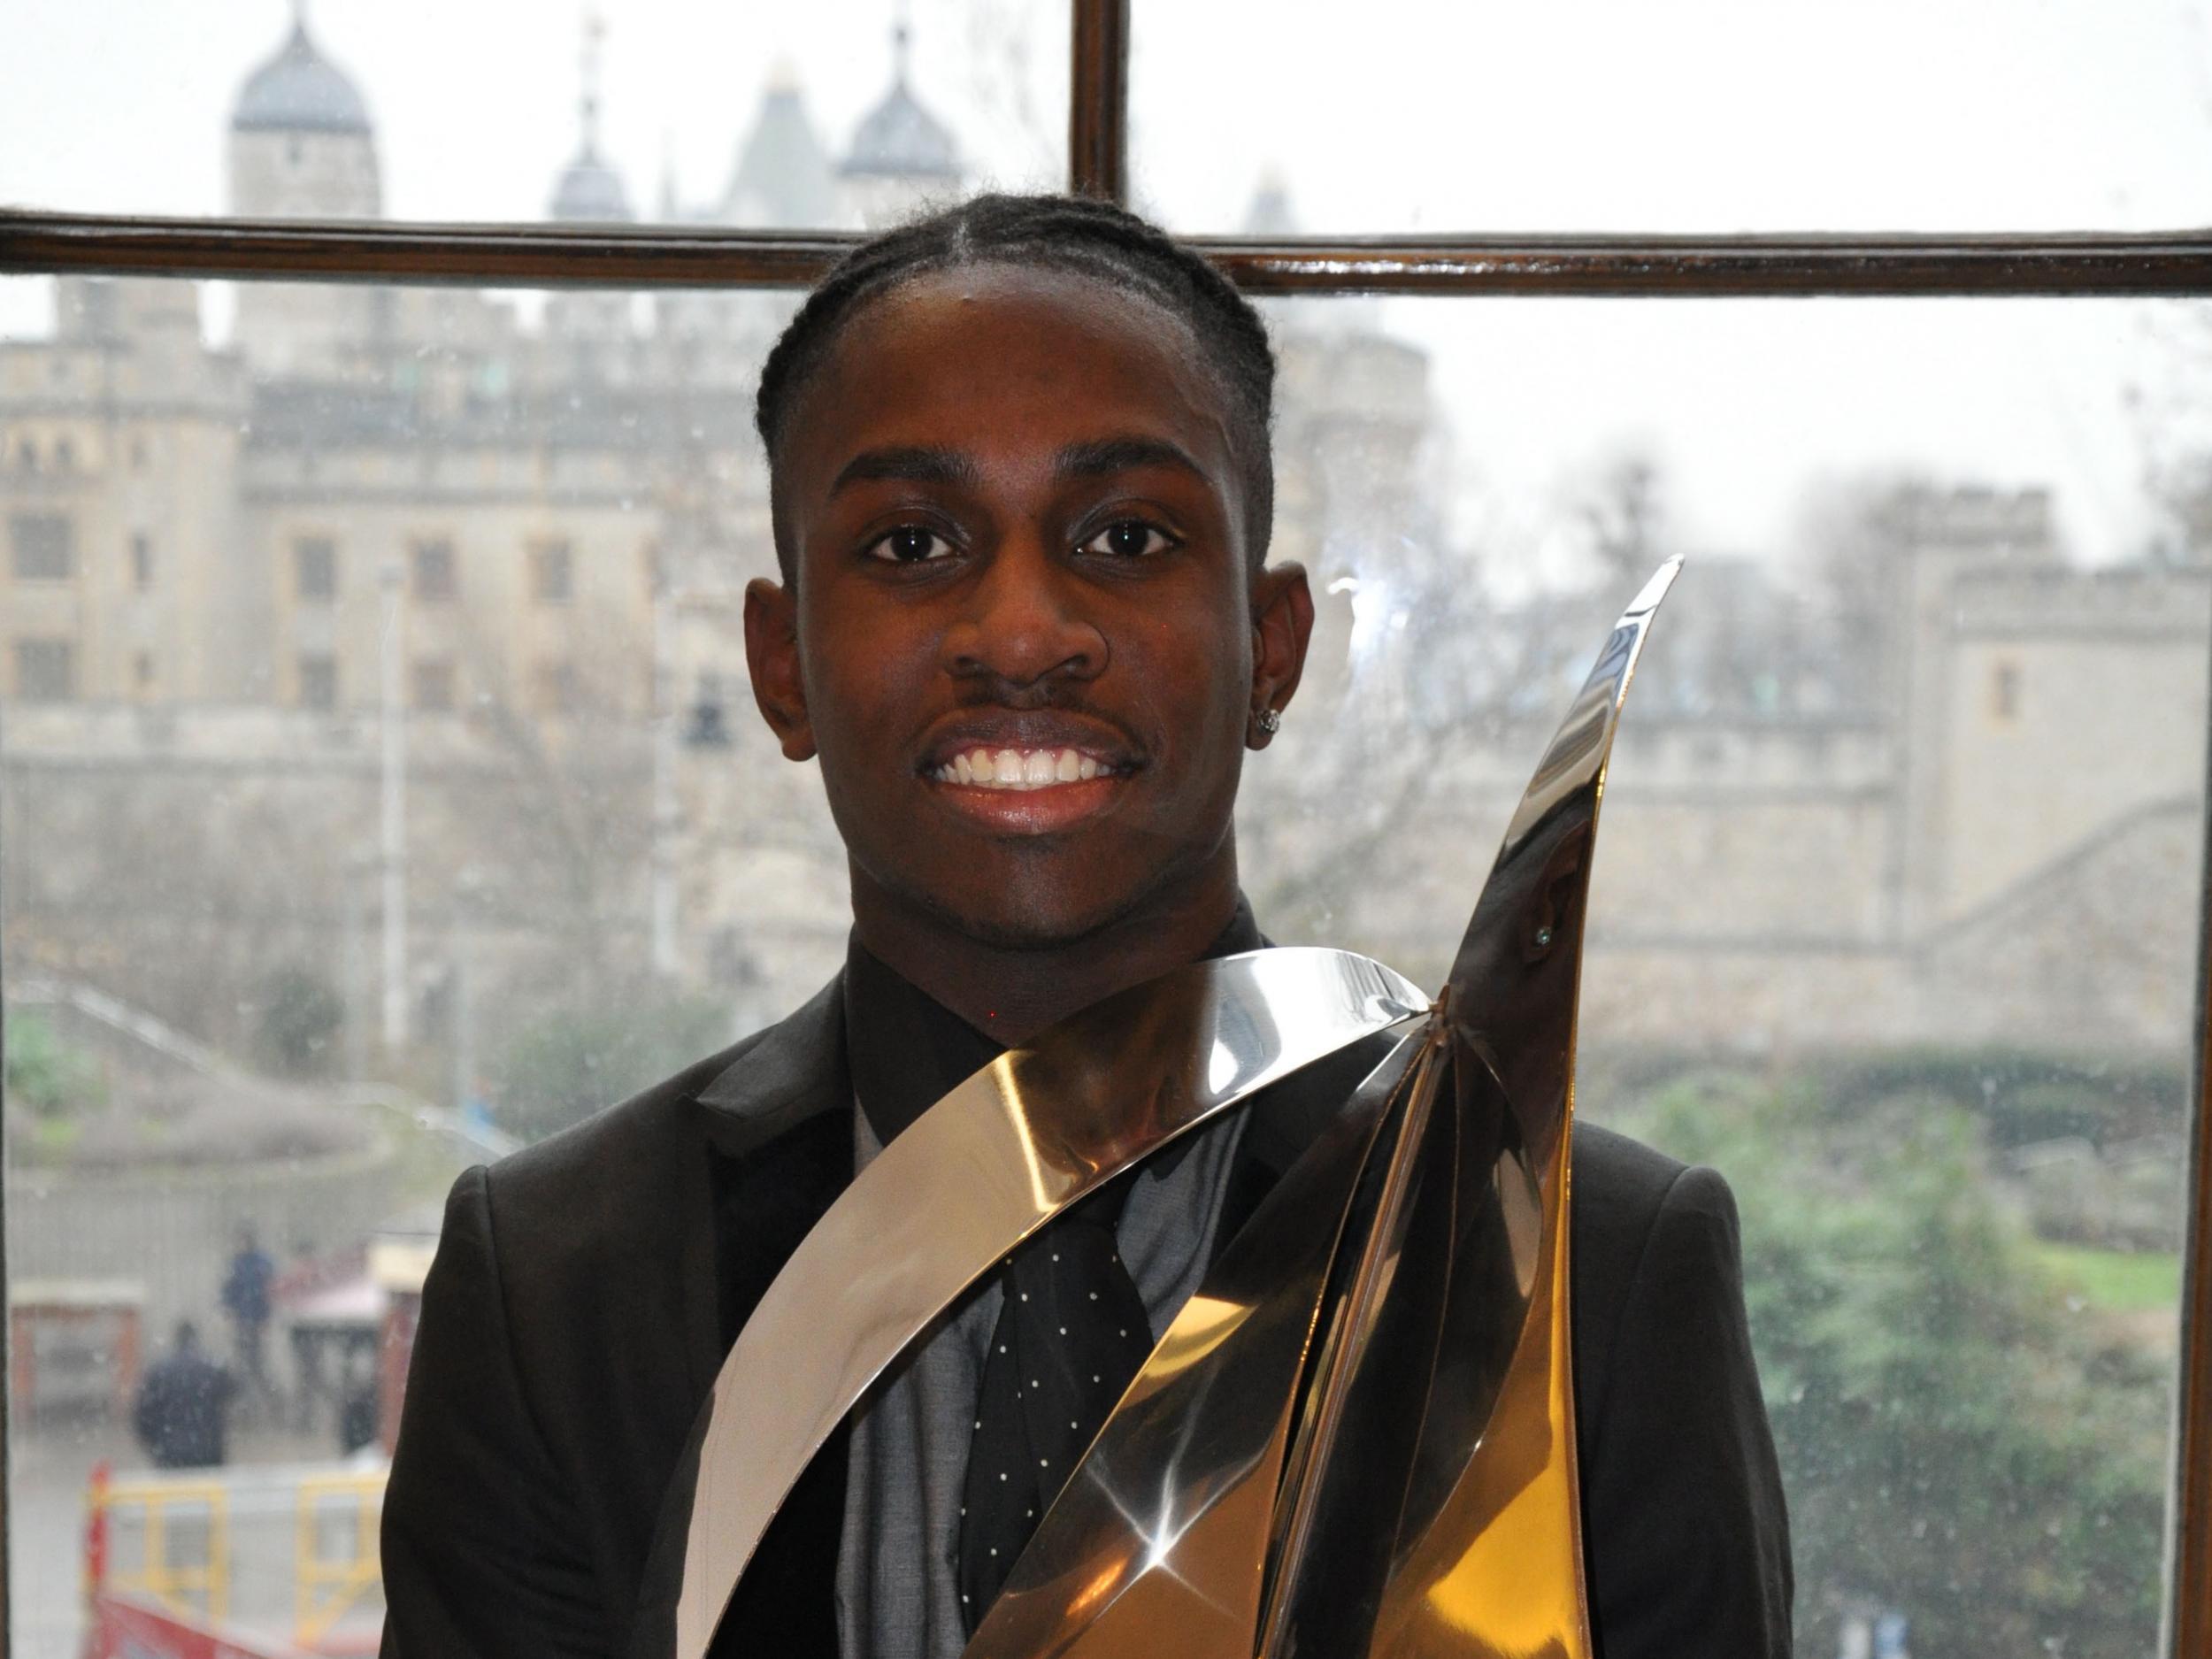 Tottenham teenager wins young sailor of the year